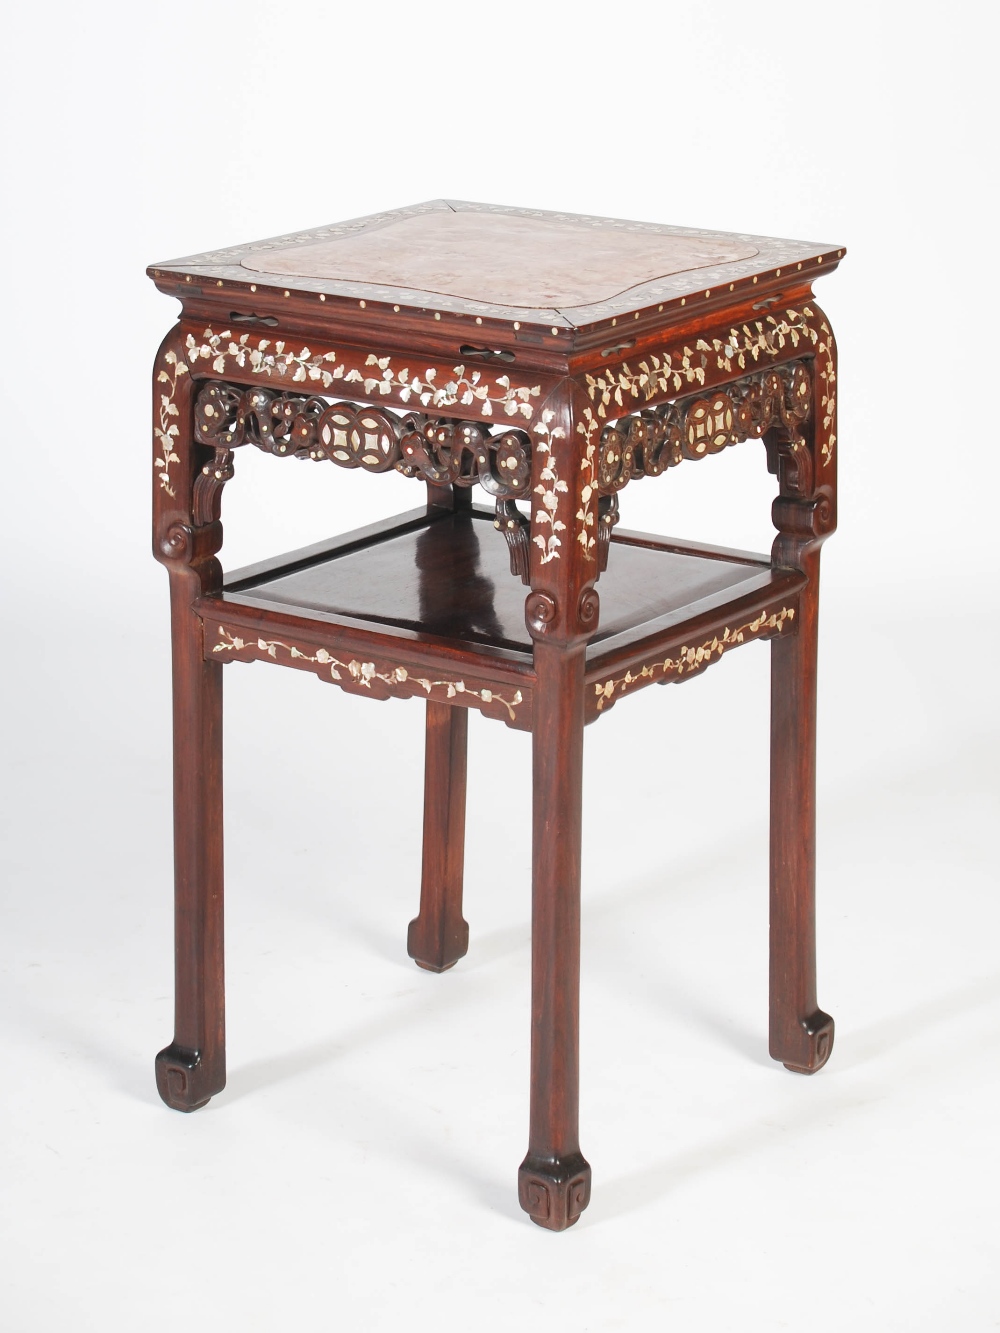 A Chinese dark wood and mother of pearl inlaid jardiniere stand, Qing Dynasty, the square shaped top